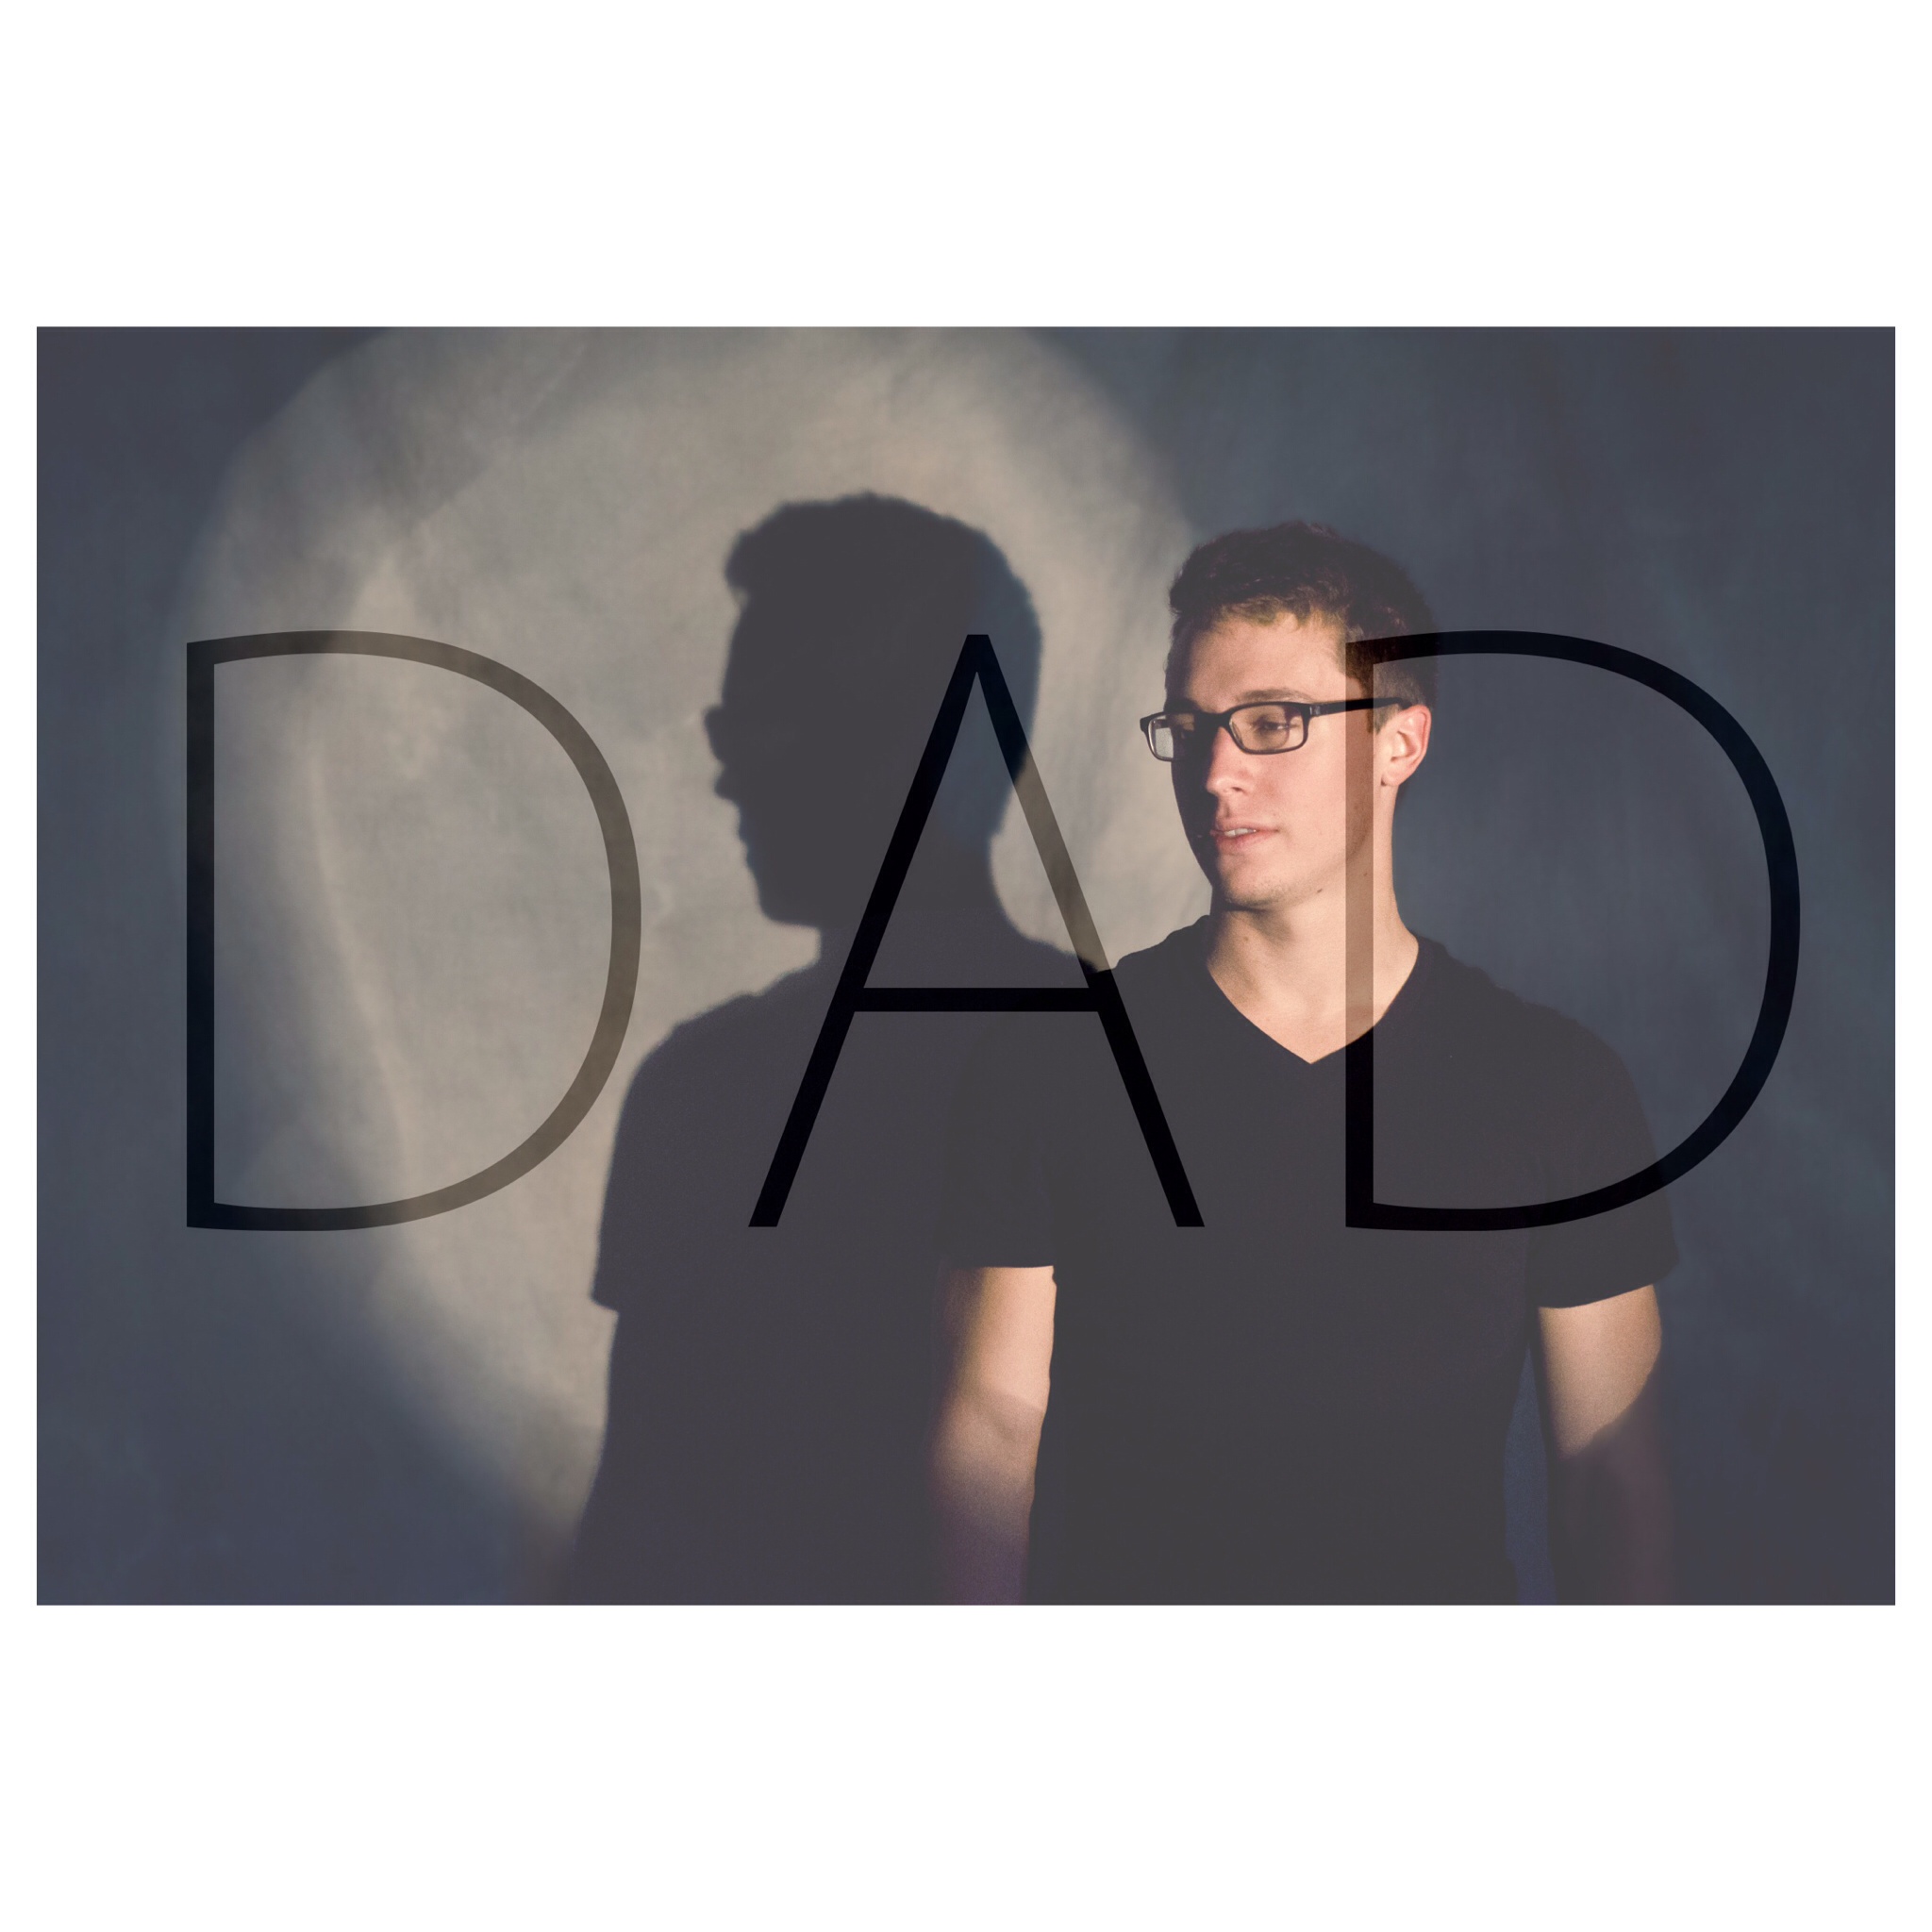 DAD Tour Dates, Concert Tickets, Albums, and Songs